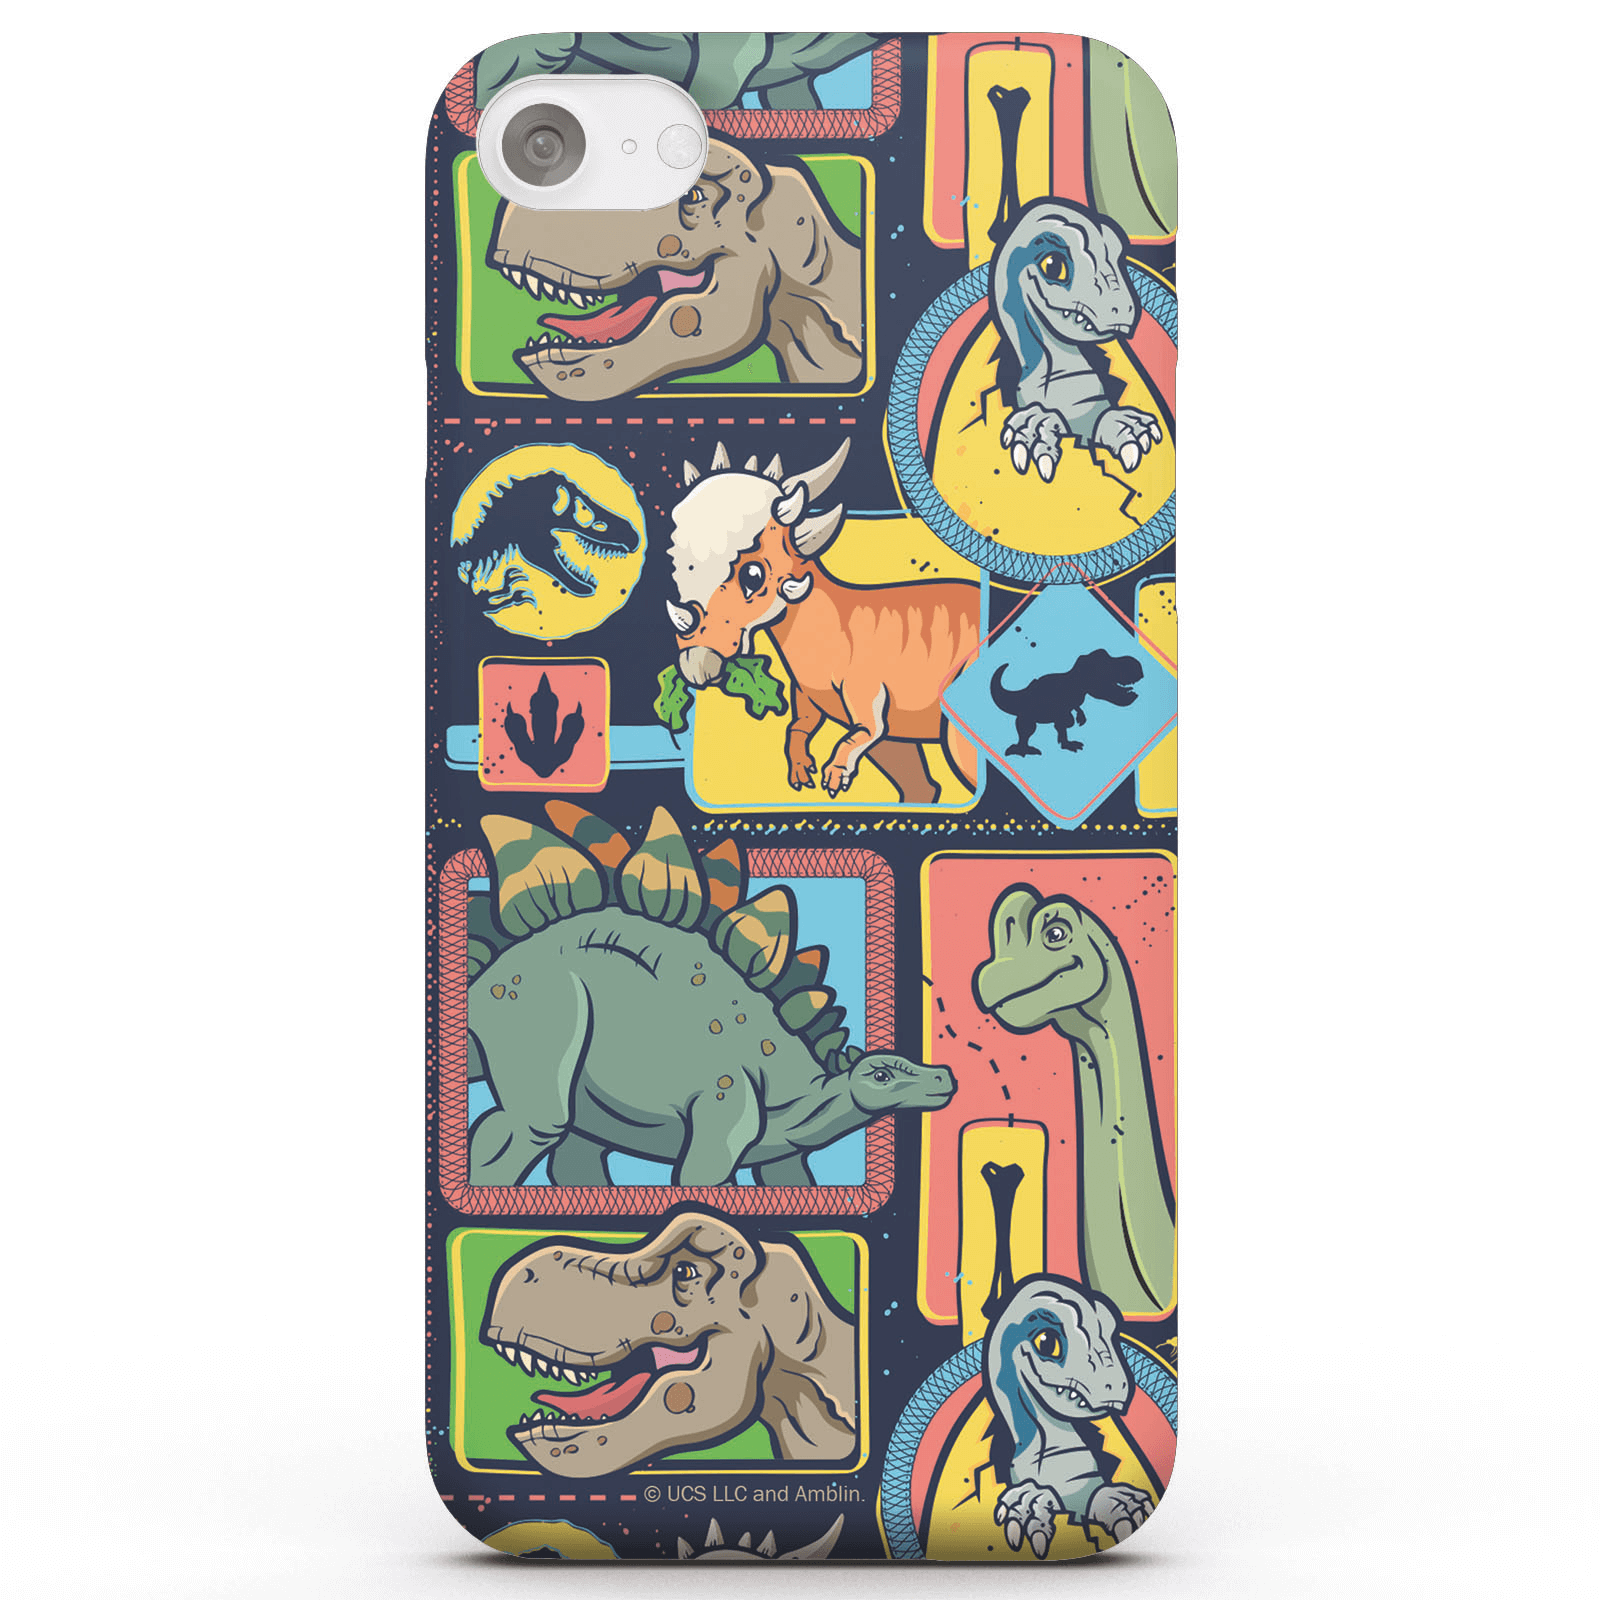 Jurassic Park Cute Dino Pattern Phone Case for iPhone and Android - iPhone 7 Plus - Tough Case - Gloss